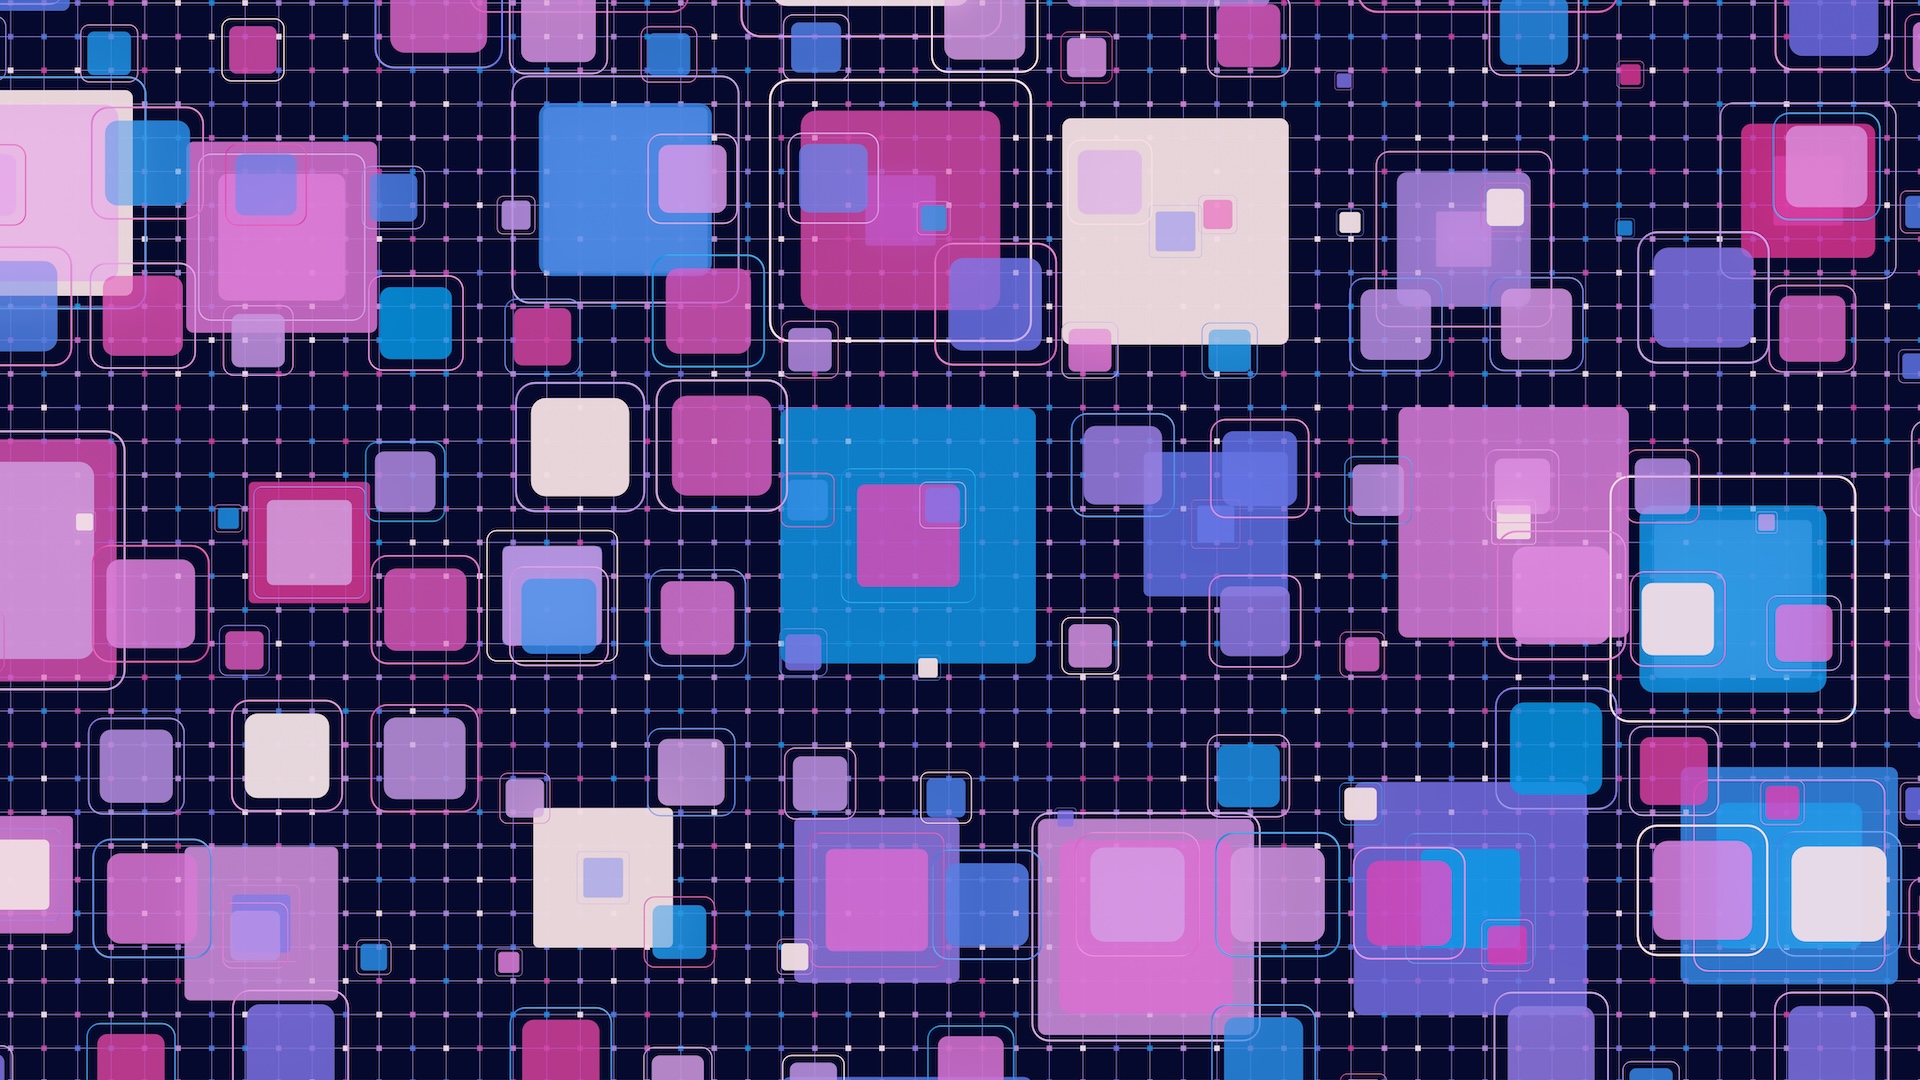 An abstract graphic illustration of purple, pink, and blue squares and dots